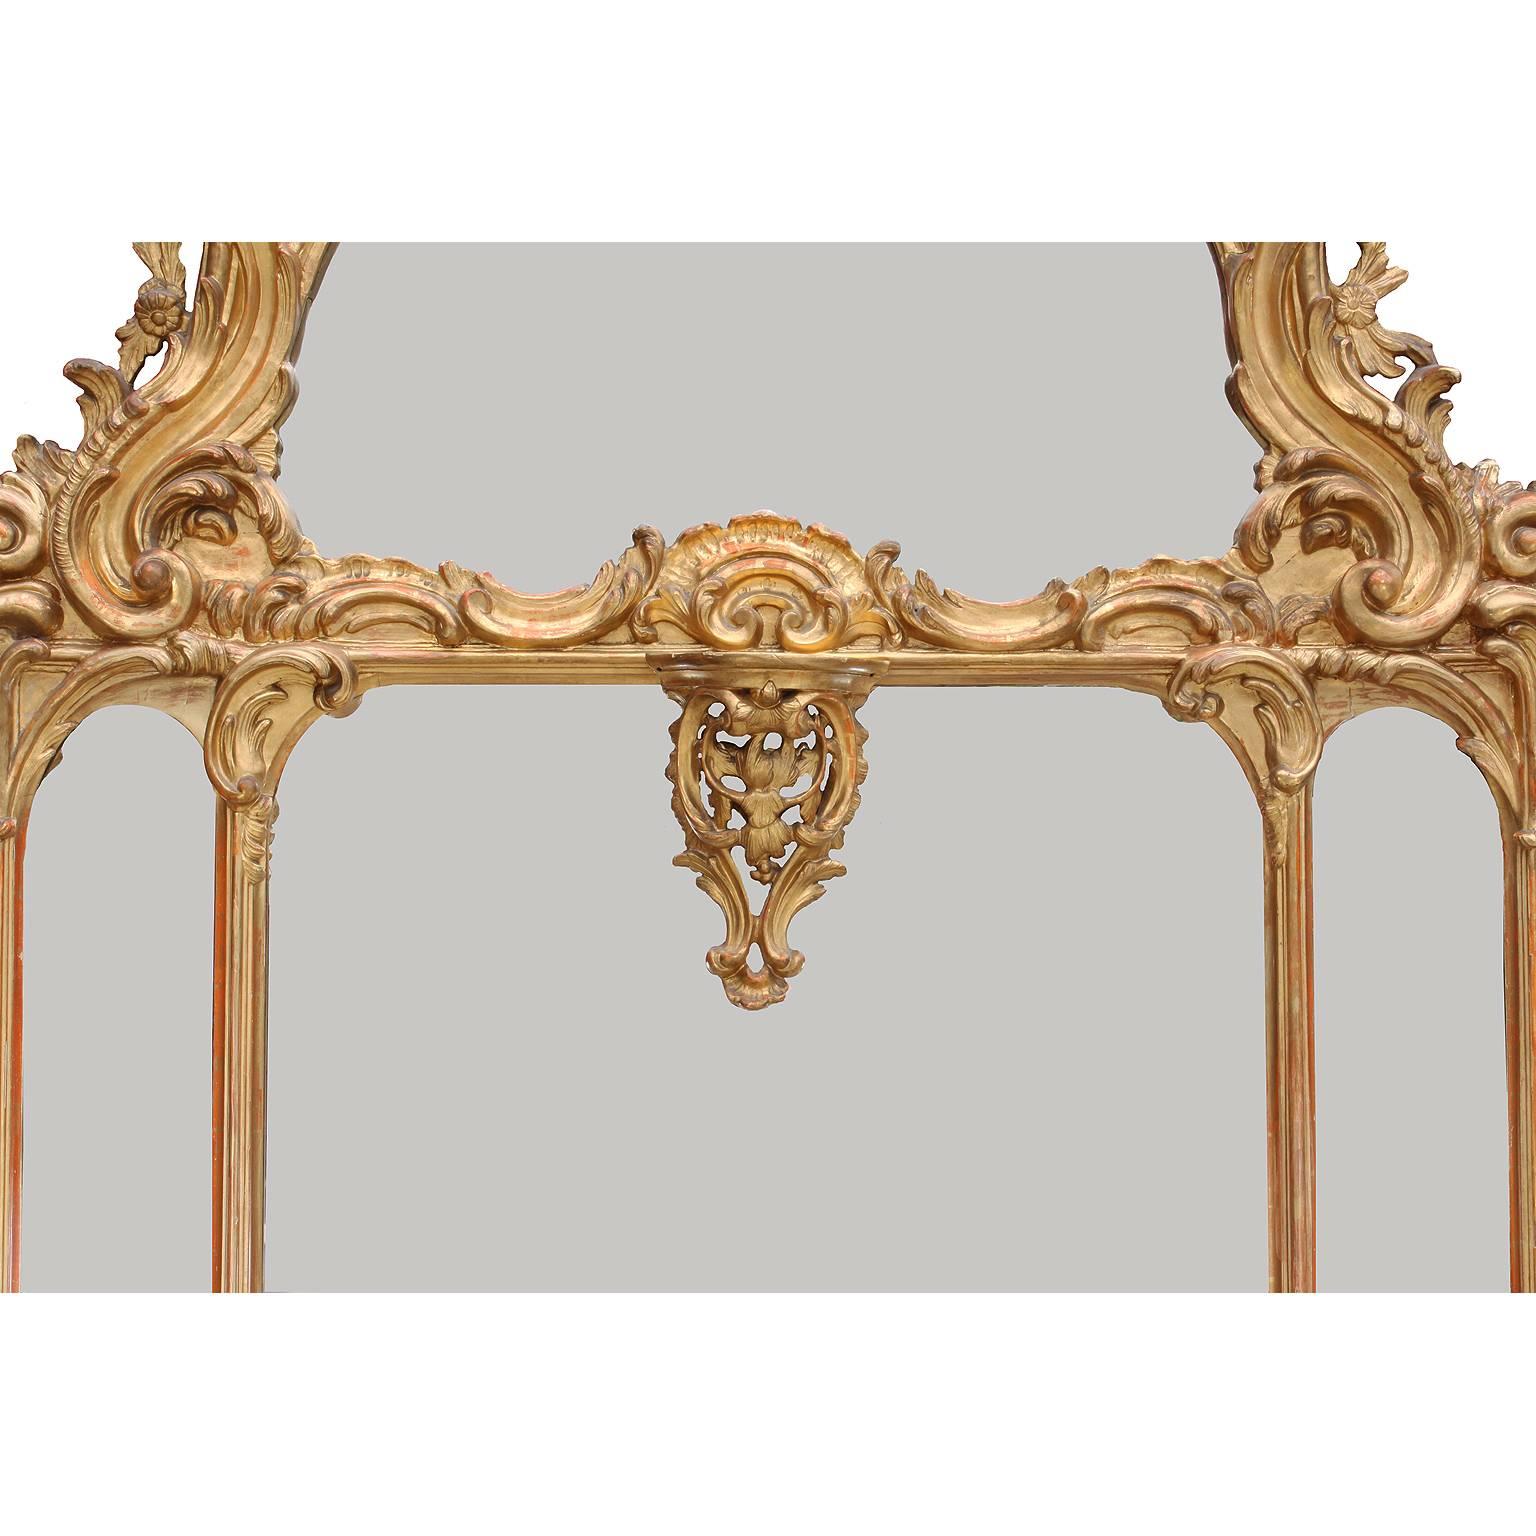 Rococo Revival Austrian 19th Century Rococo Style Giltwood Carved and Gesso Overmantel Mirror For Sale